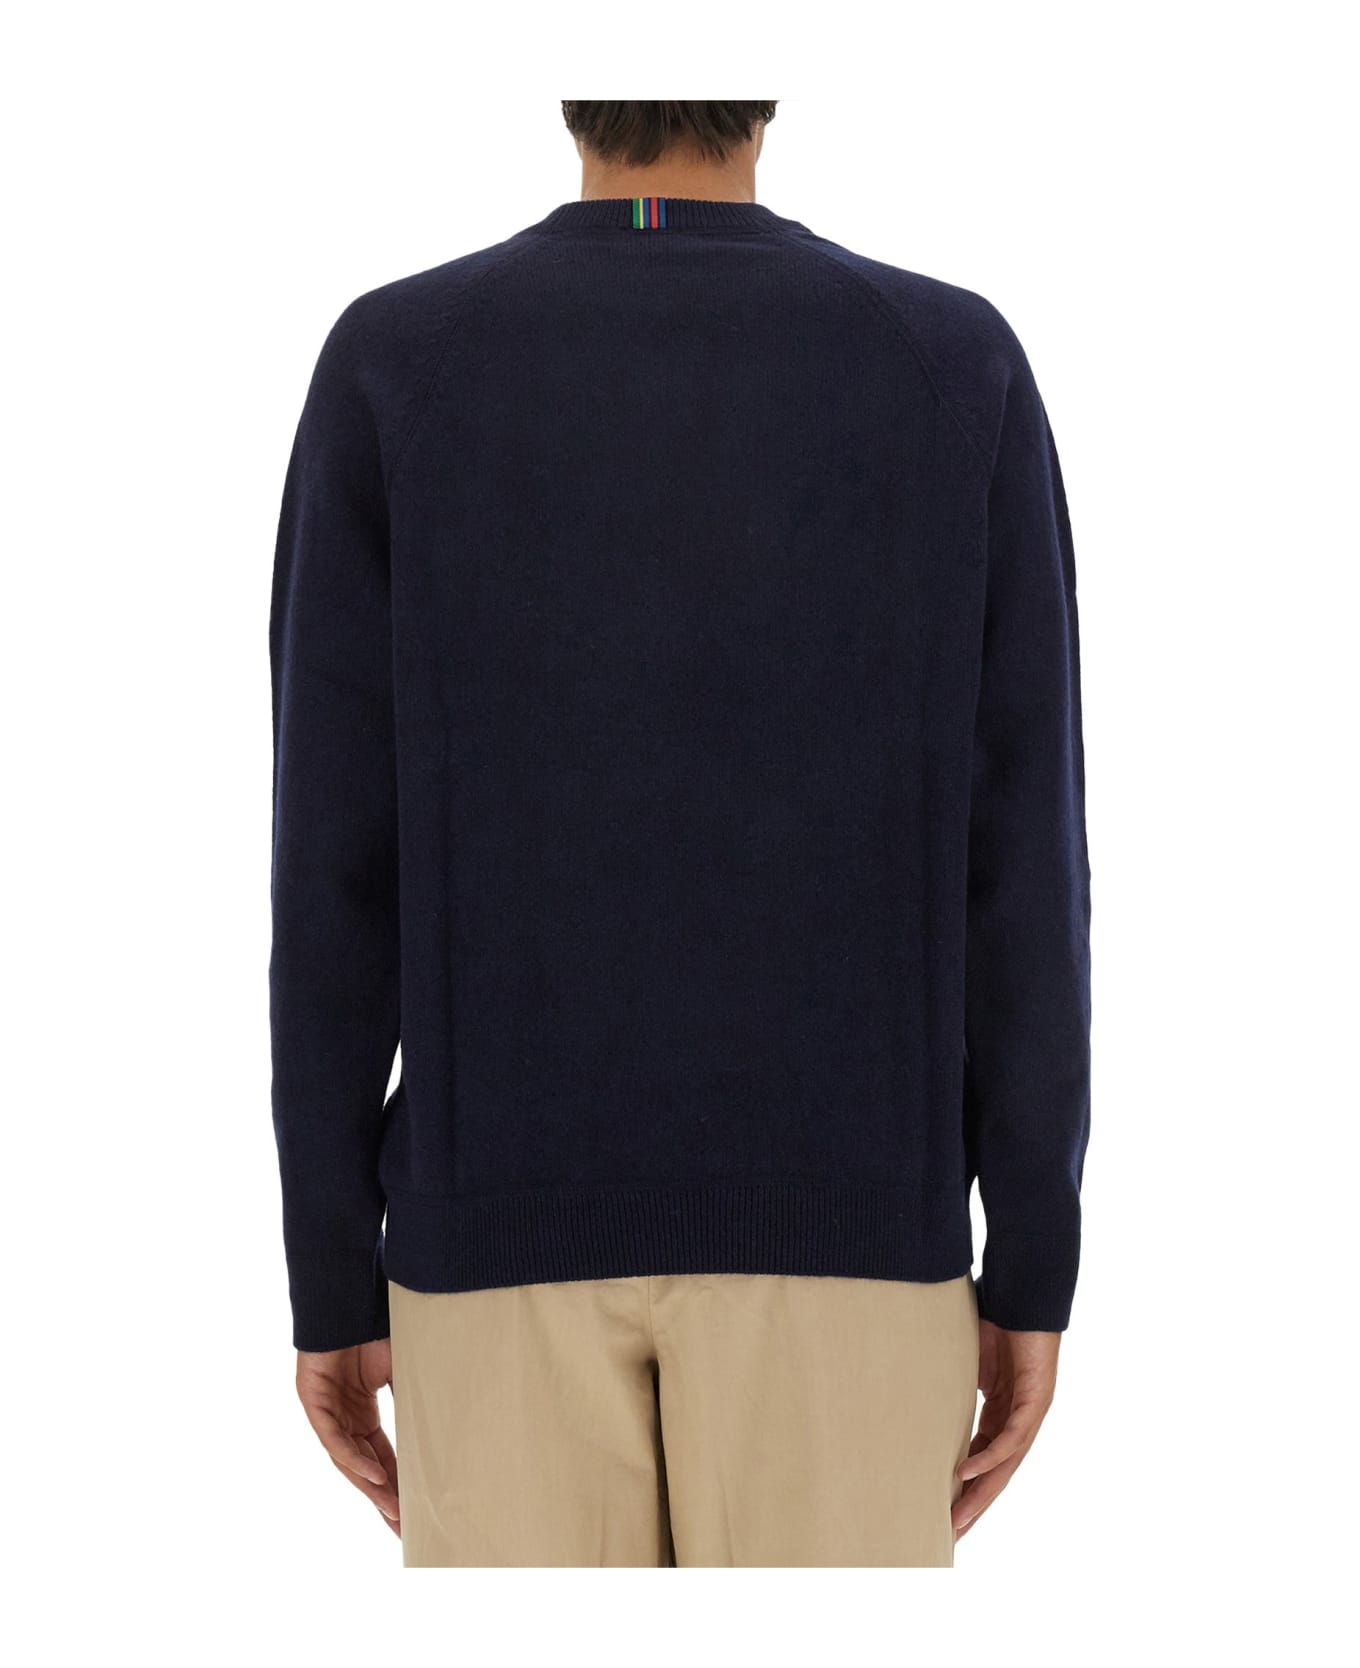 PS by Paul Smith Wool Jersey. - BLUE